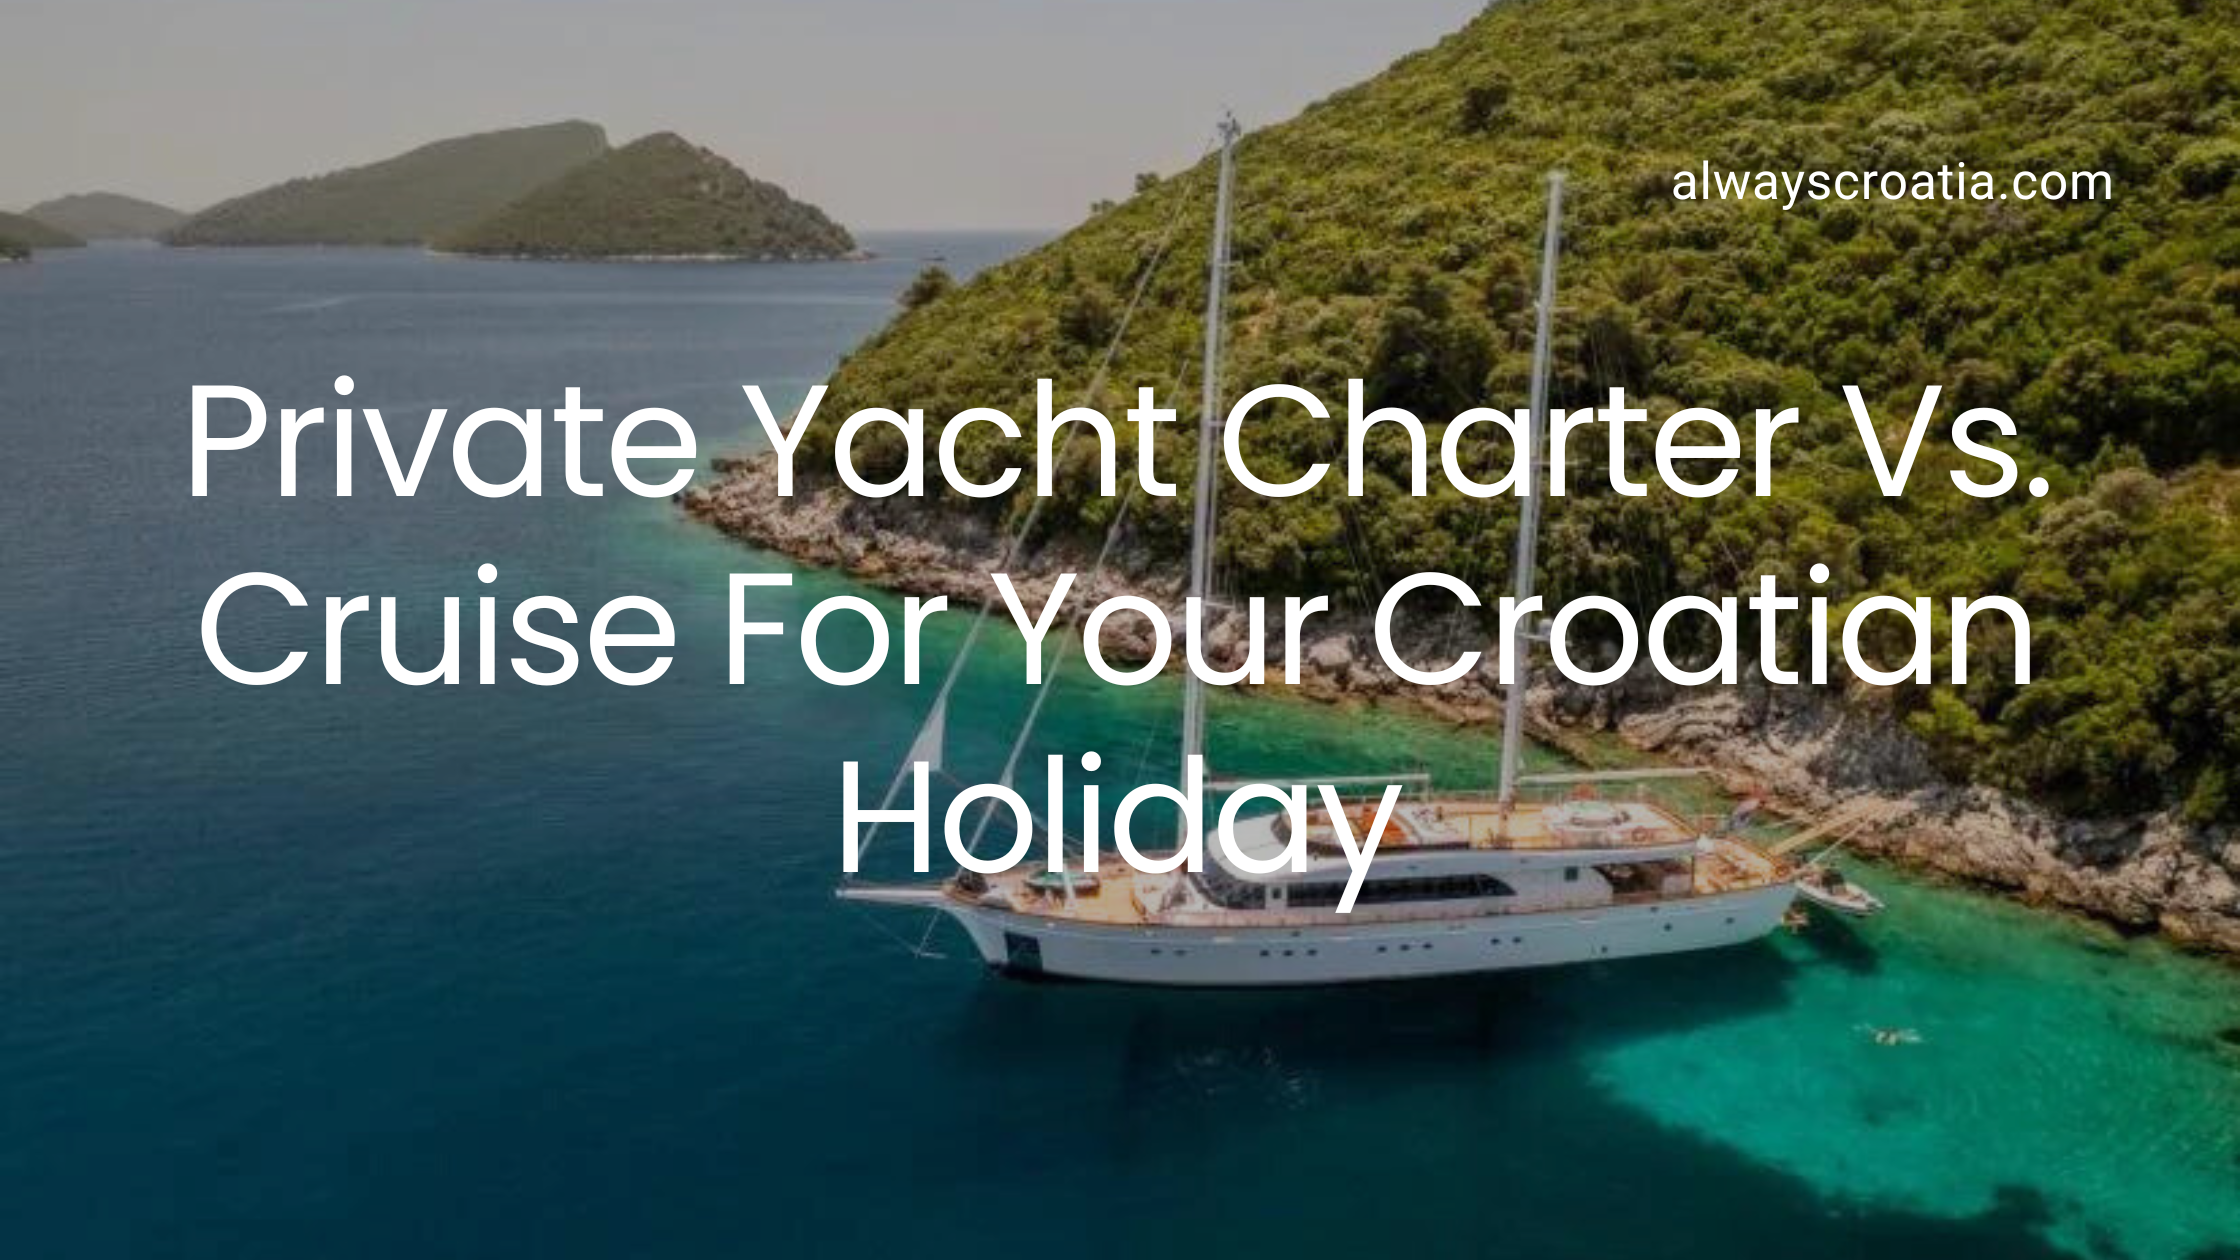 A sailing boat anchored near rocky shore with the title over it Private yacht charter vs cruise for your Croatian Holiday